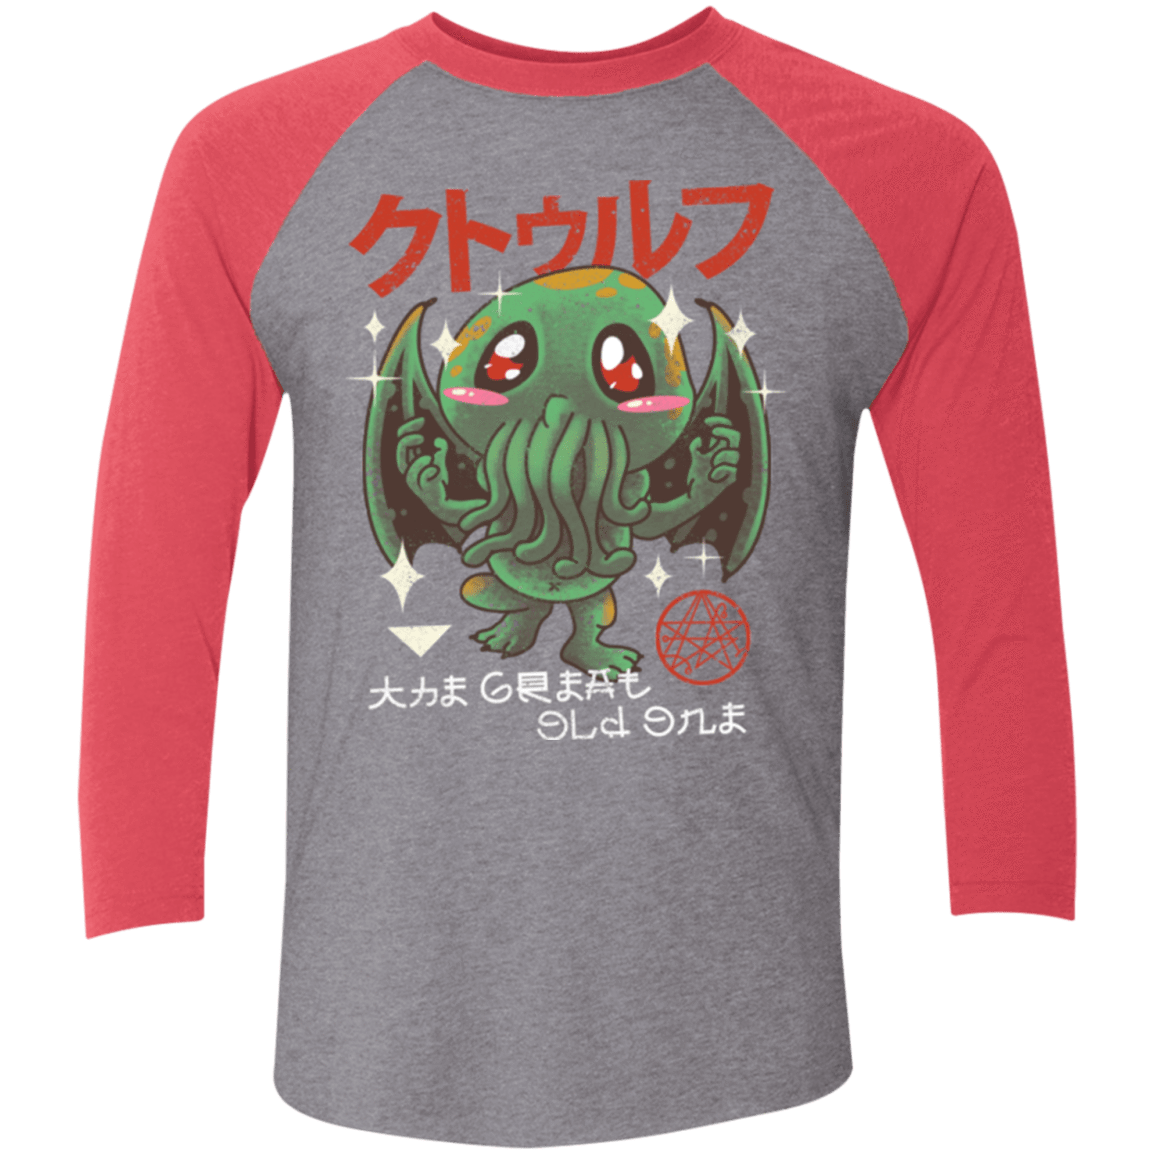 T-Shirts Premium Heather/ Vintage Red / X-Small The Great Old Kawaii Men's Triblend 3/4 Sleeve